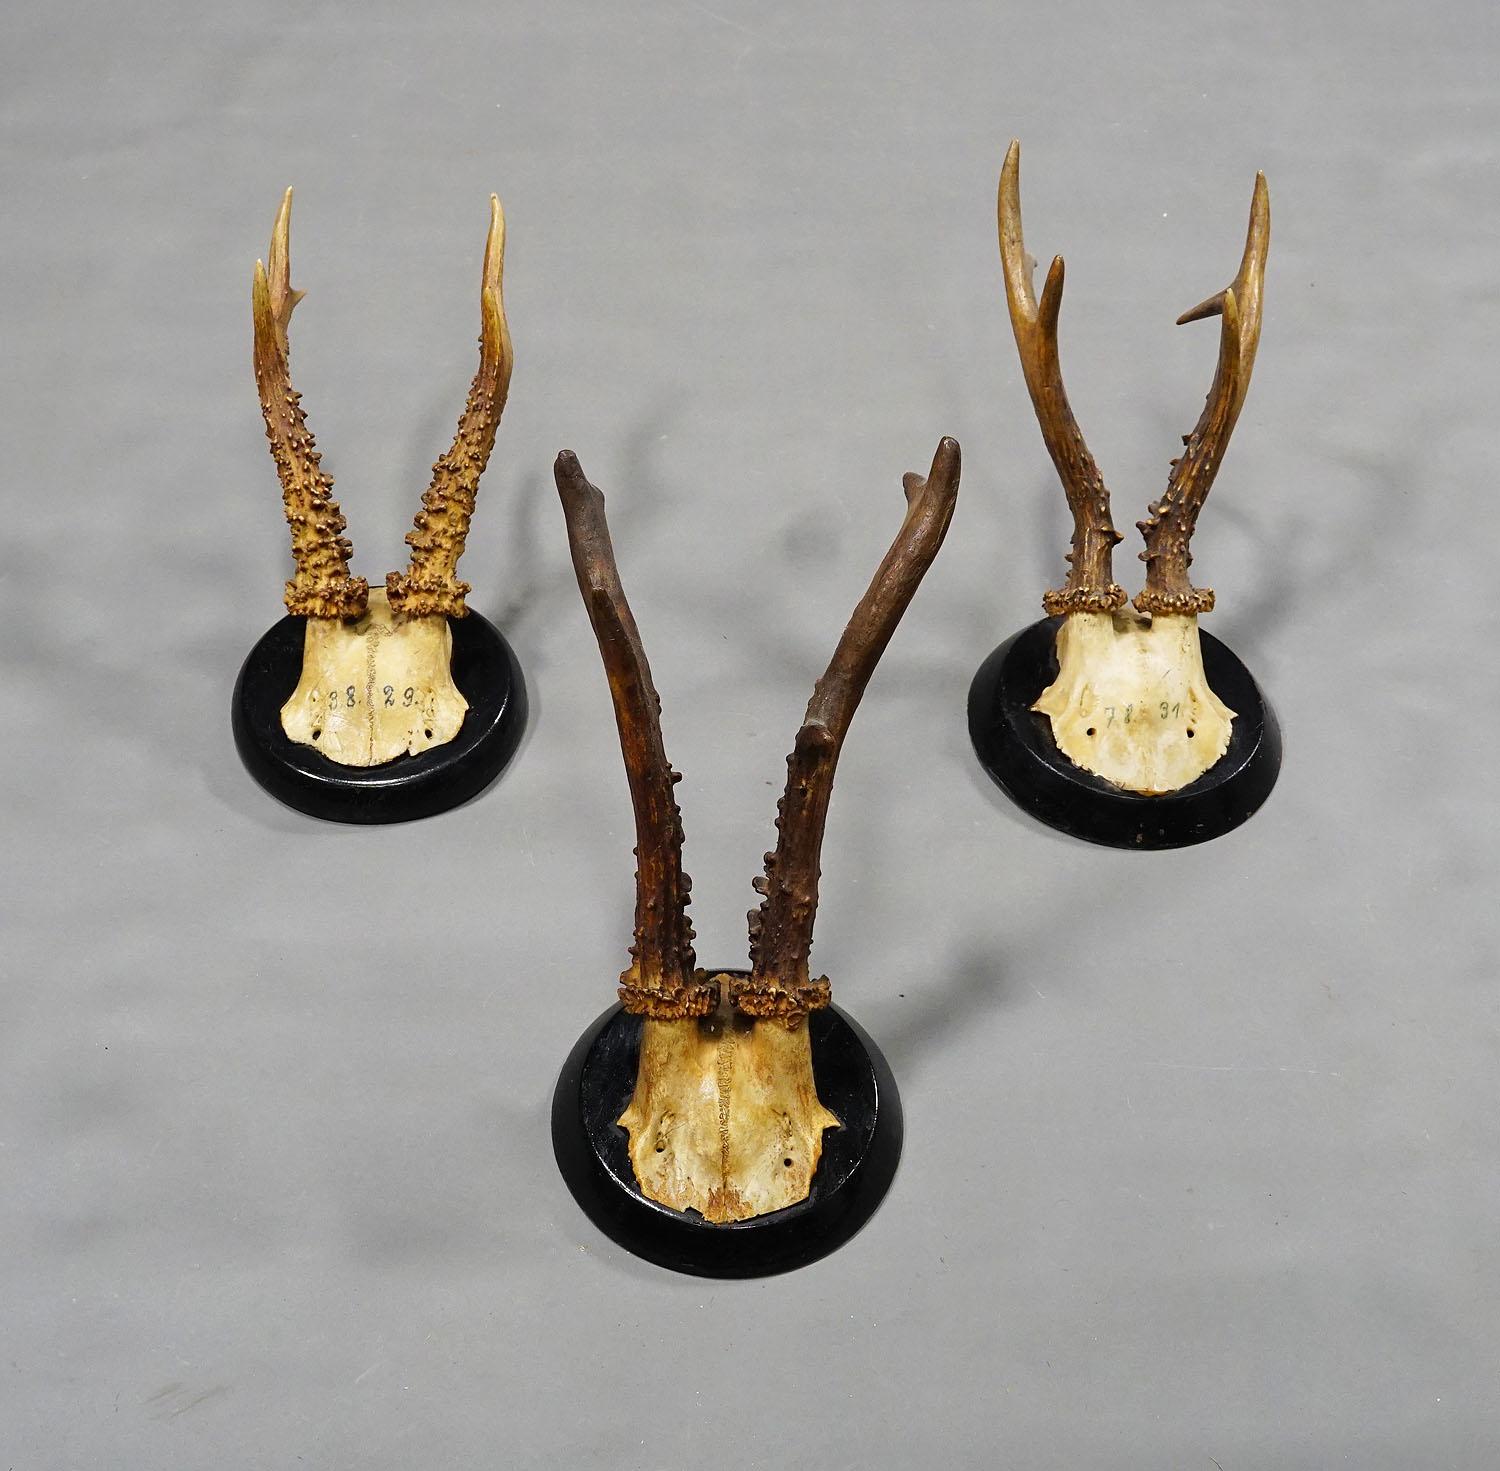 Rustic Six Antique Deer Trophies on Wooden Plaques, Germany, ca. 1900 For Sale